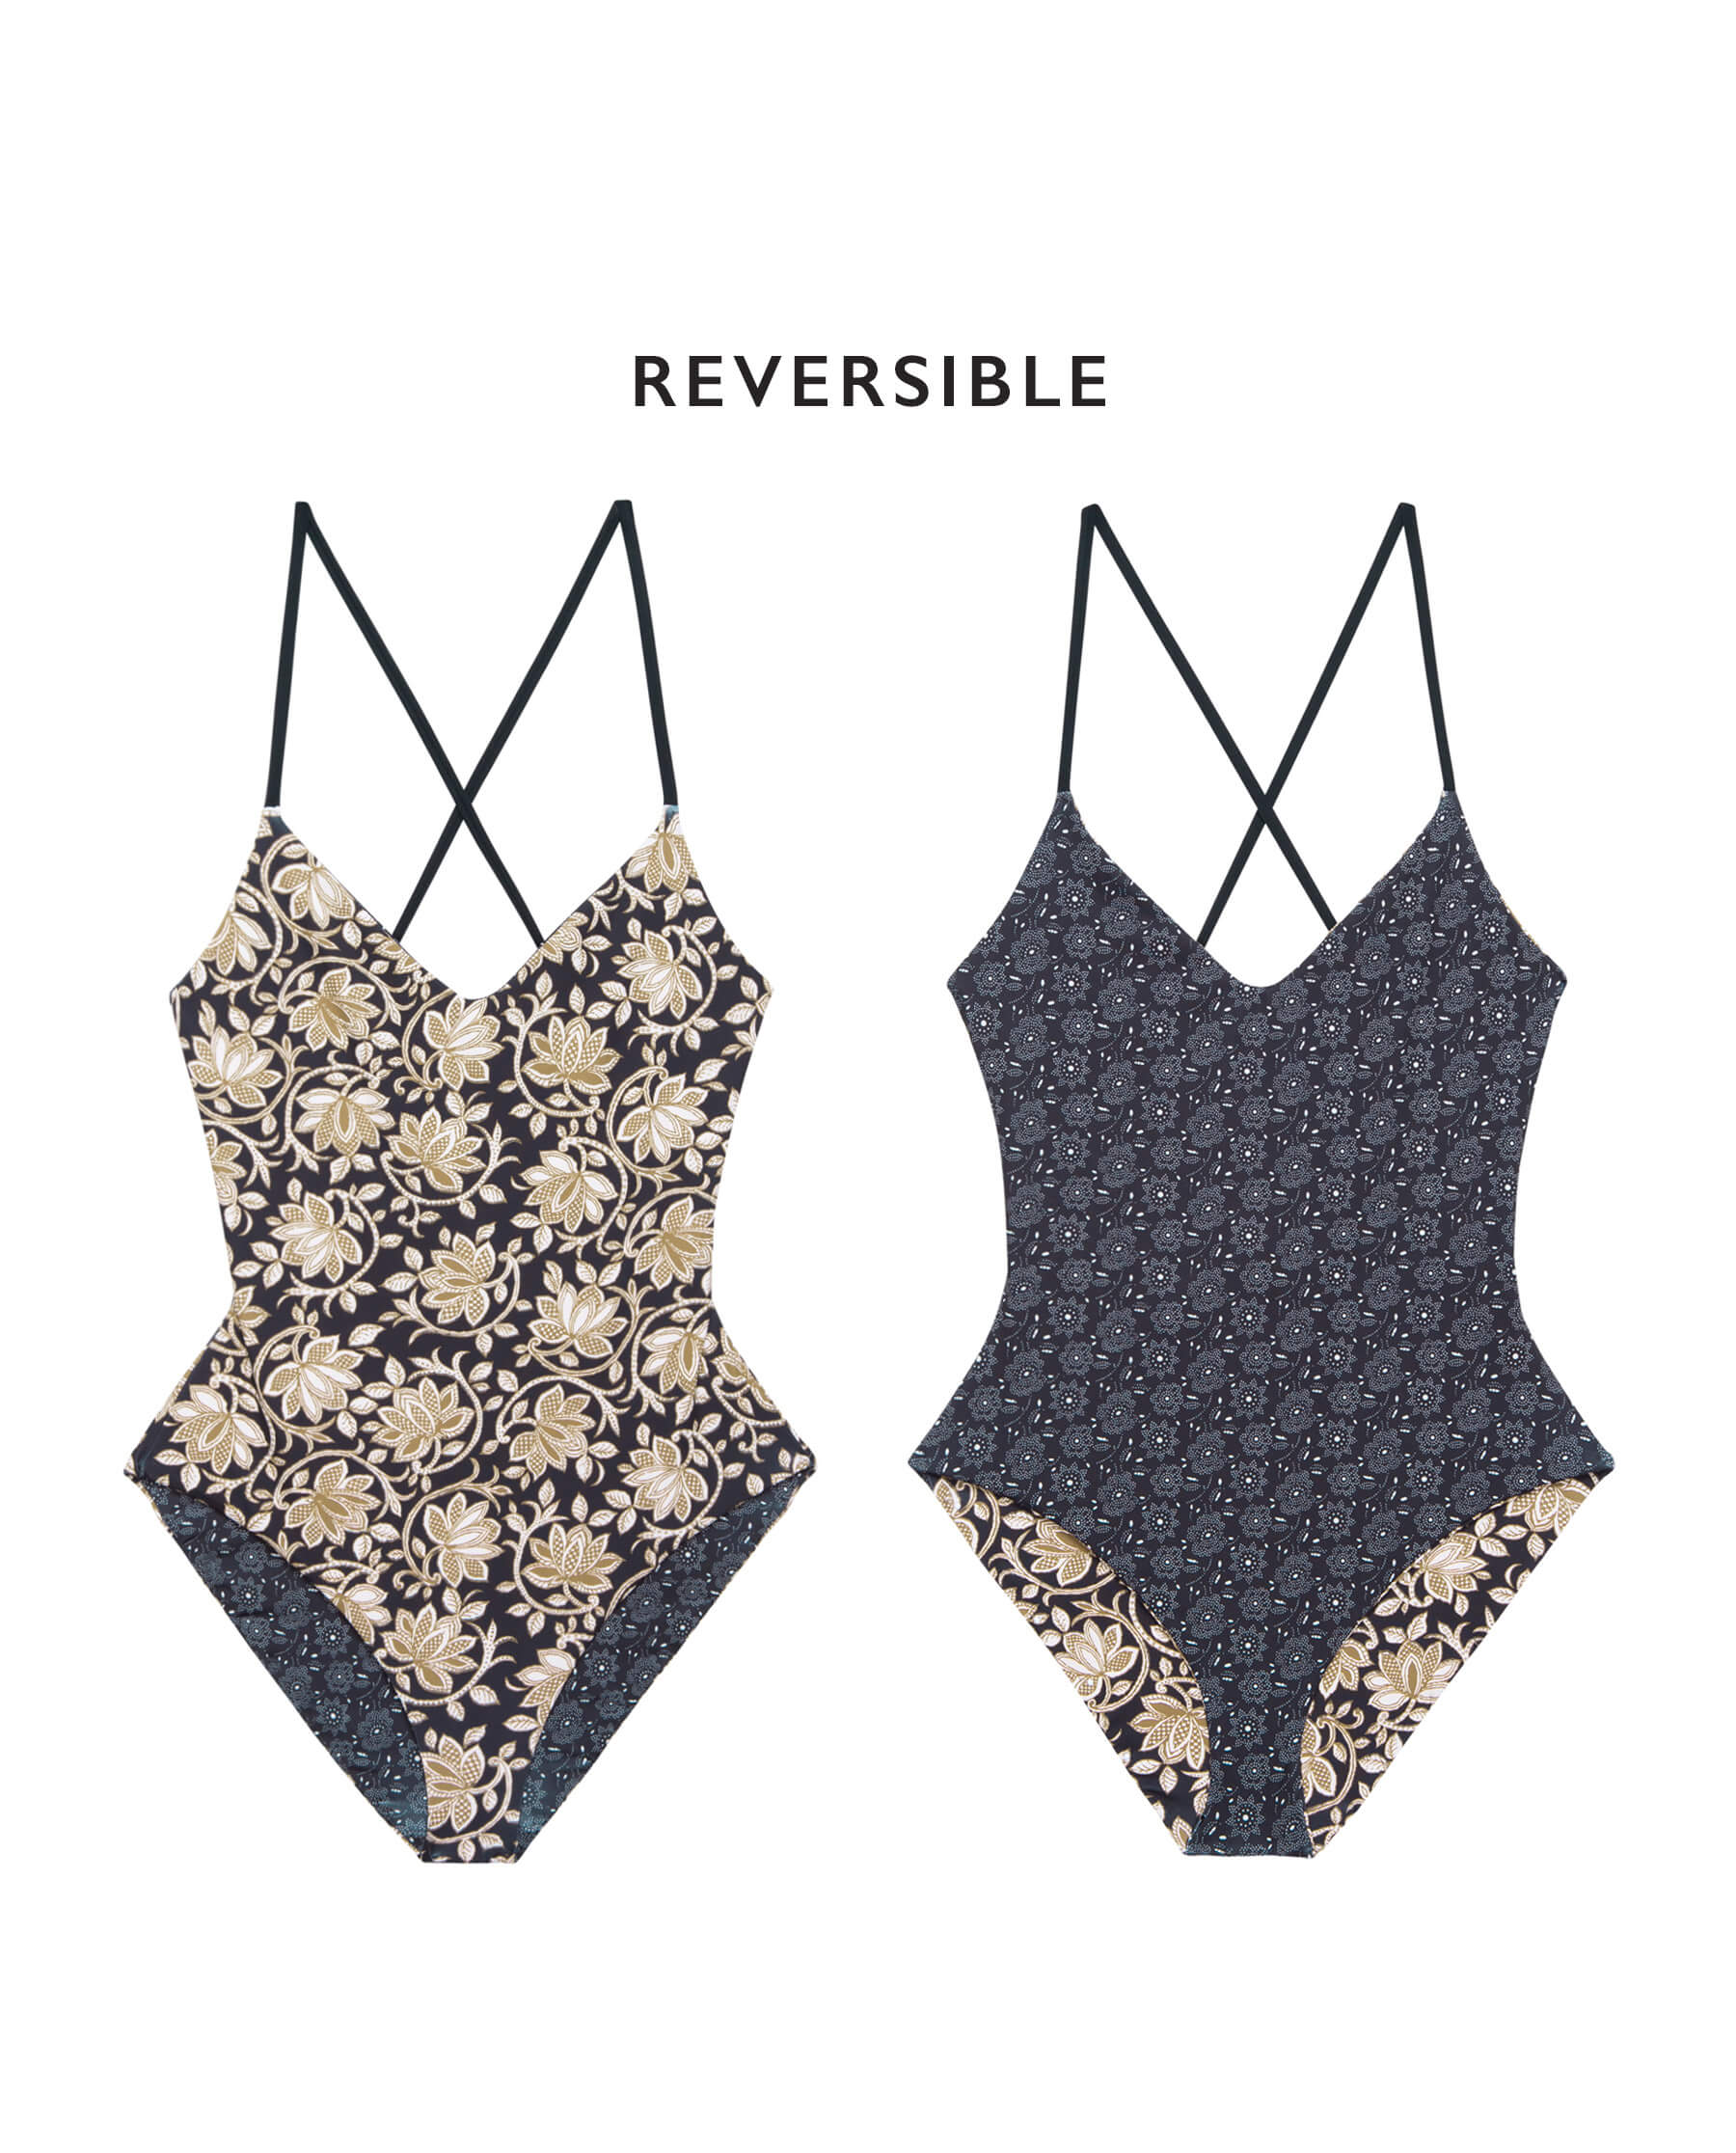 The Reversible Lace Up One Piece. -- Black Oasis Floral and Black Bandana Daisy SWIM ONE PIECES THE GREAT. SP24 SWIM